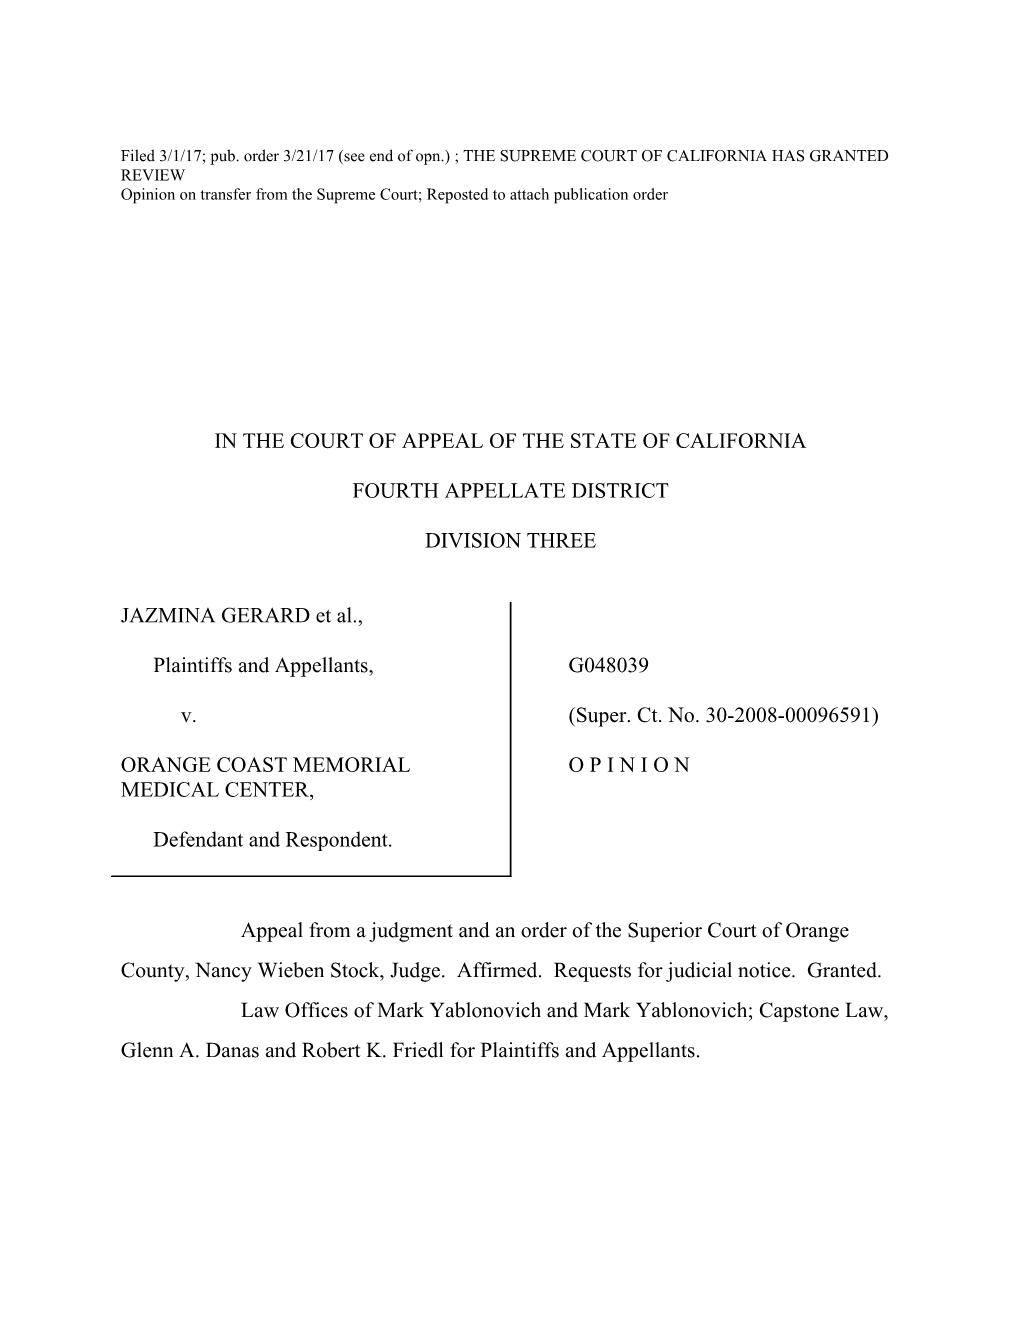 Opinion on Transfer from the Supreme Court; Reposted to Attach Publication Order